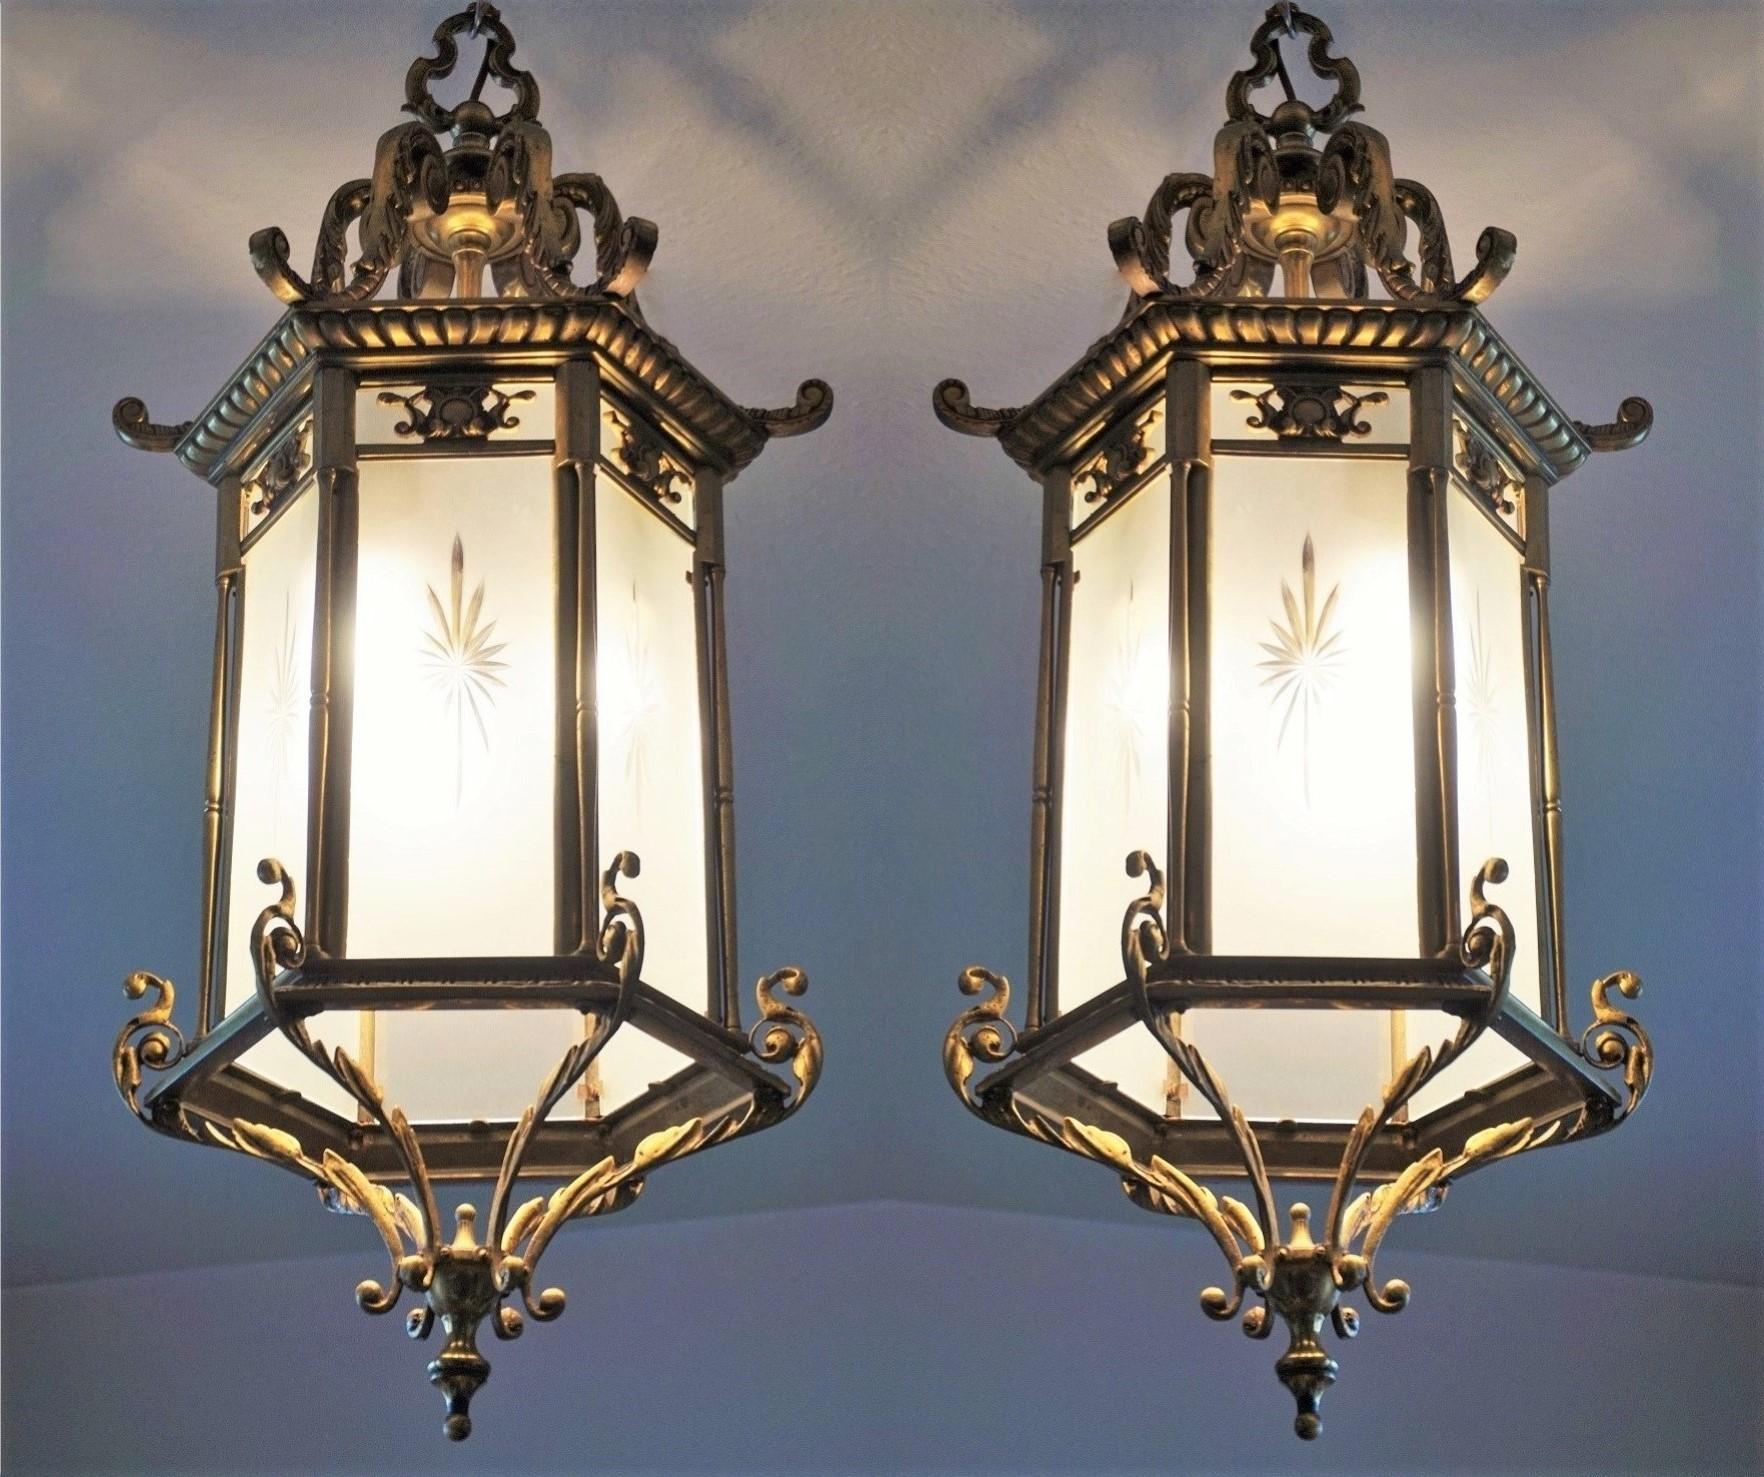 Pair of heavy, large Regency style thee-light lanterns, France, circa 1870-1880. Solid bronze and parcel brass with six frosted cut glass windows. The lanterns arrive with solid bronze canopy and chain.
Three E27 light bulb sockets. Rewired and